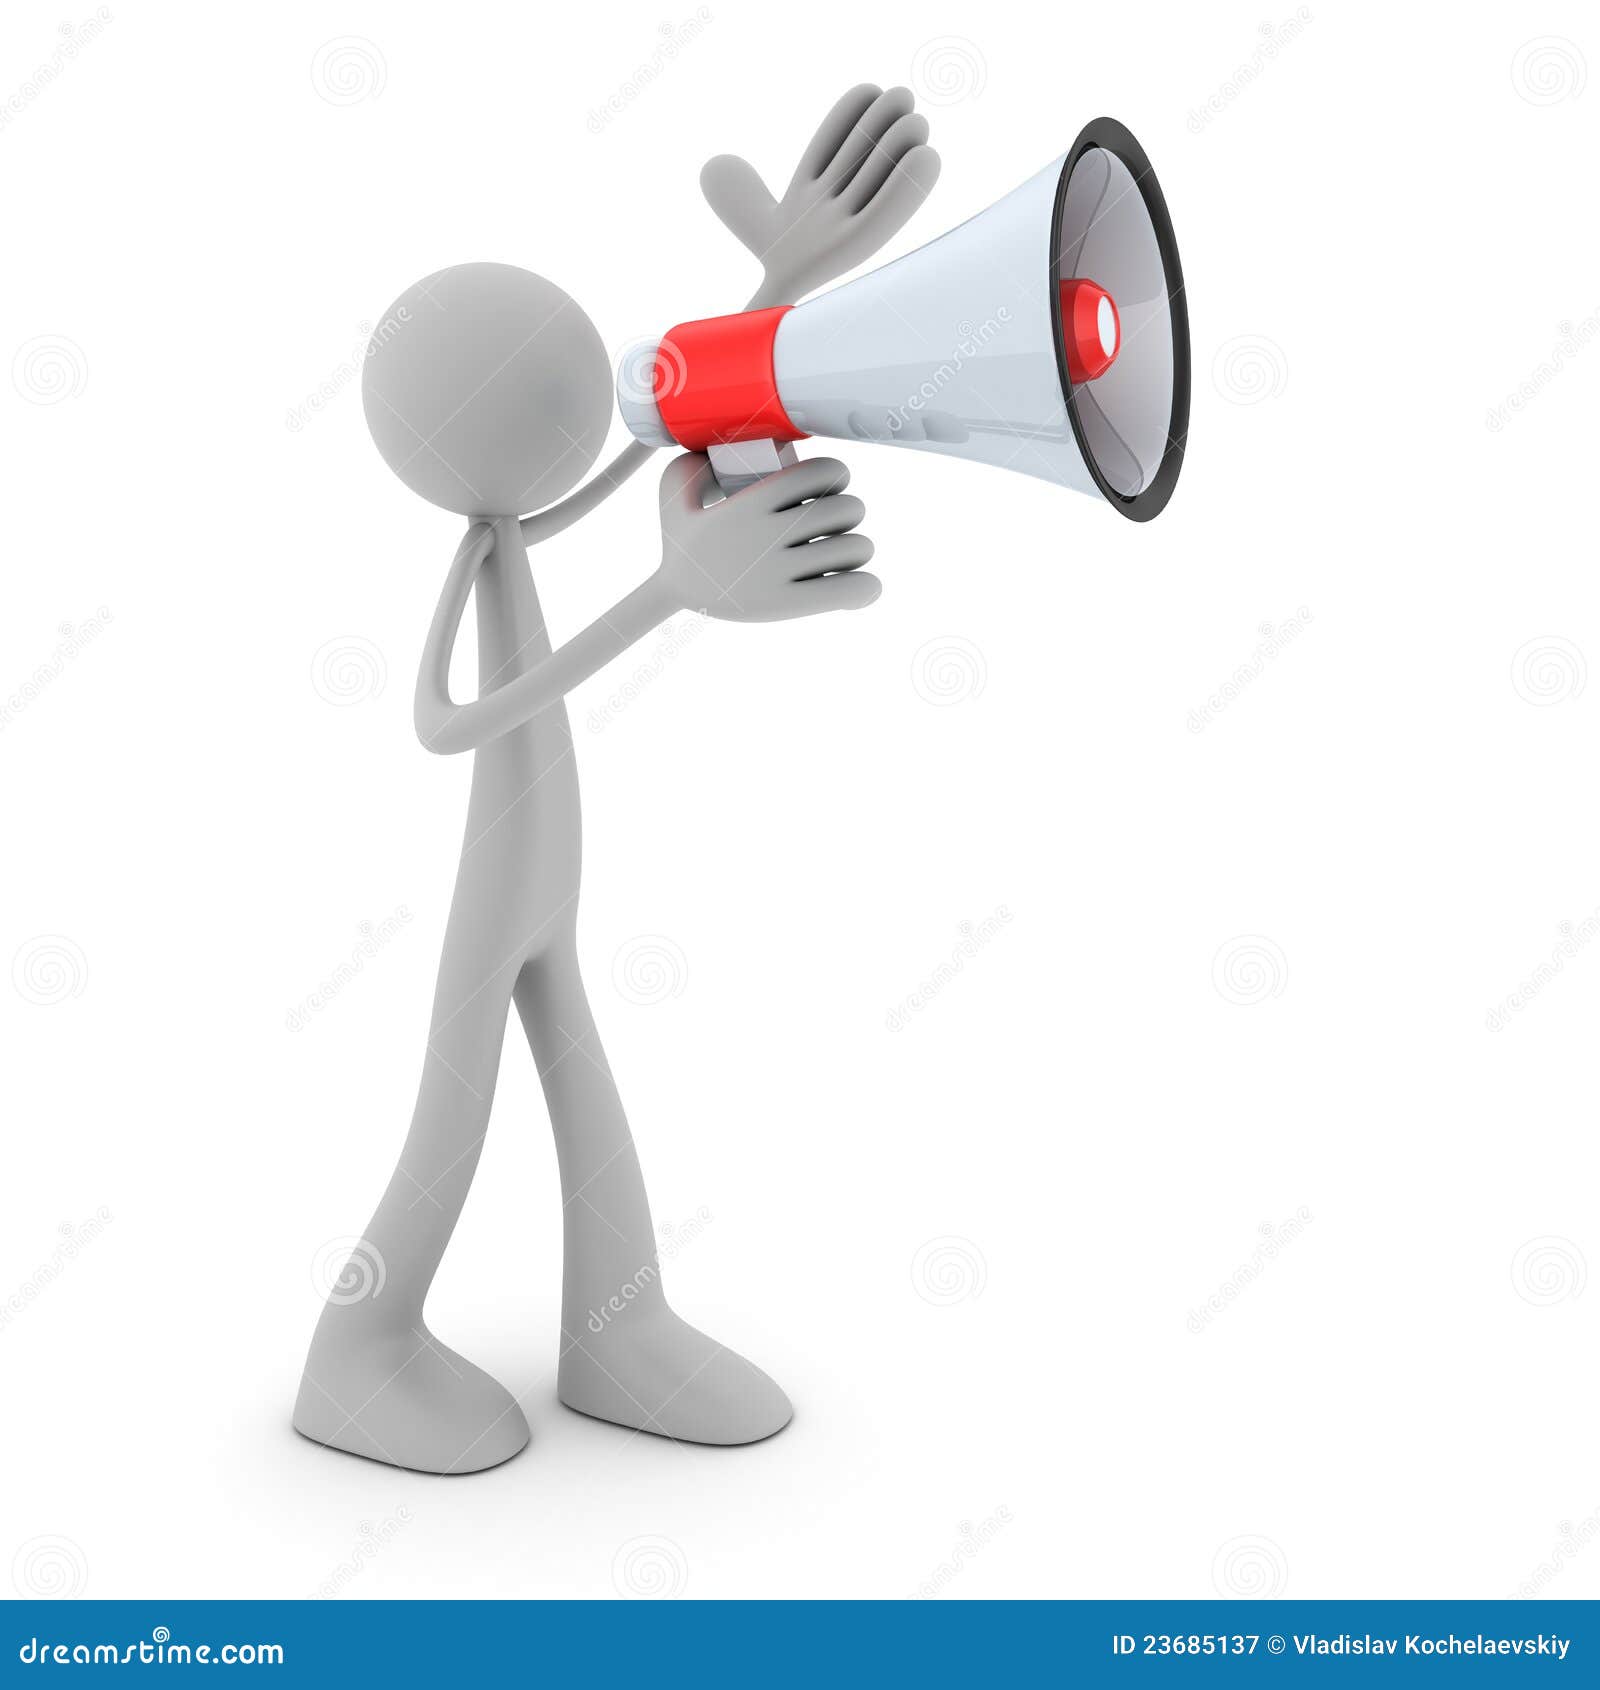 clipart man with megaphone - photo #8